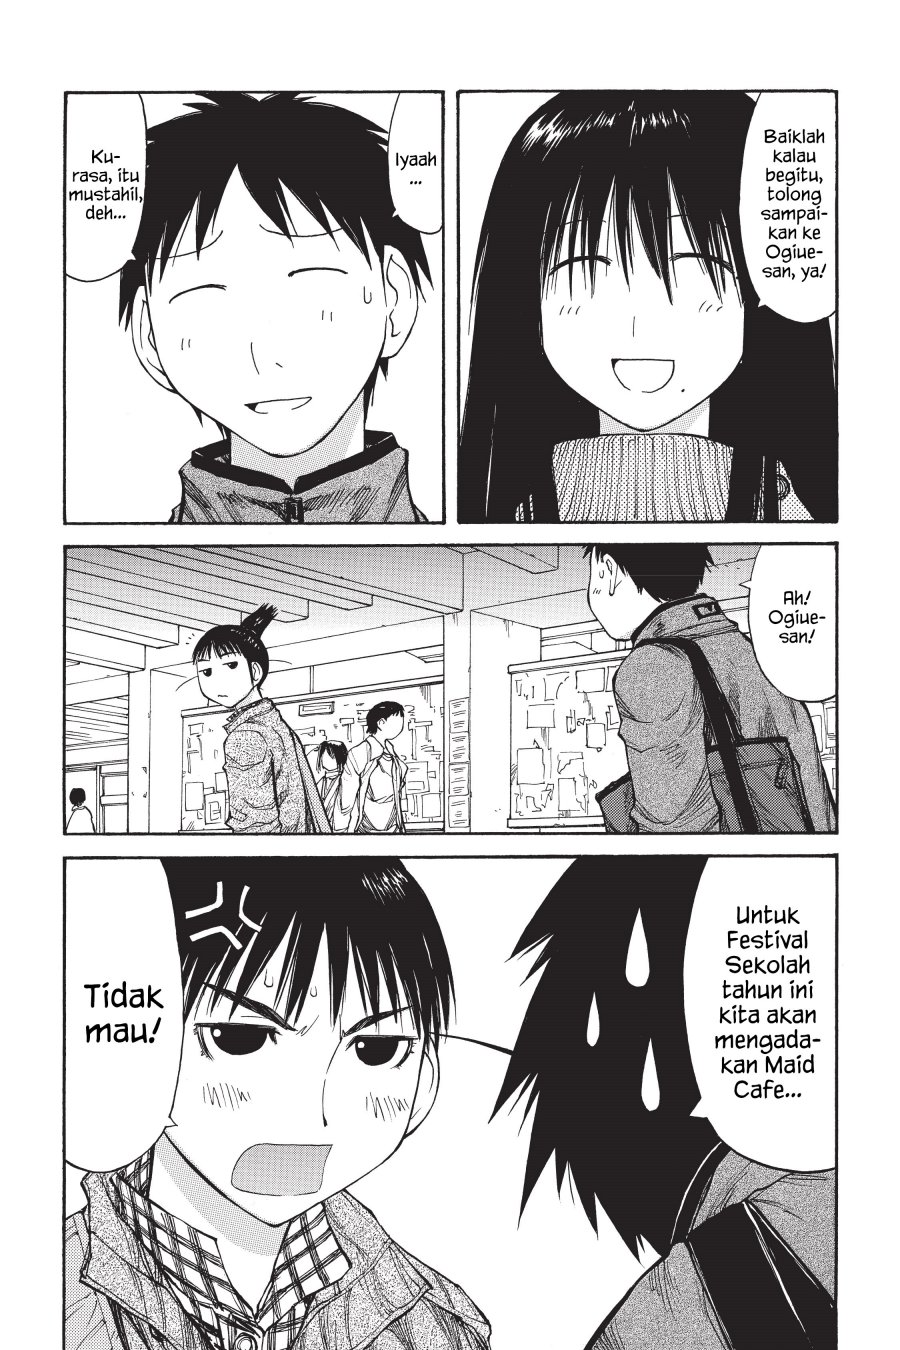 Genshiken – The Society for the Study of Modern Visual Culture Chapter 49 Image 0